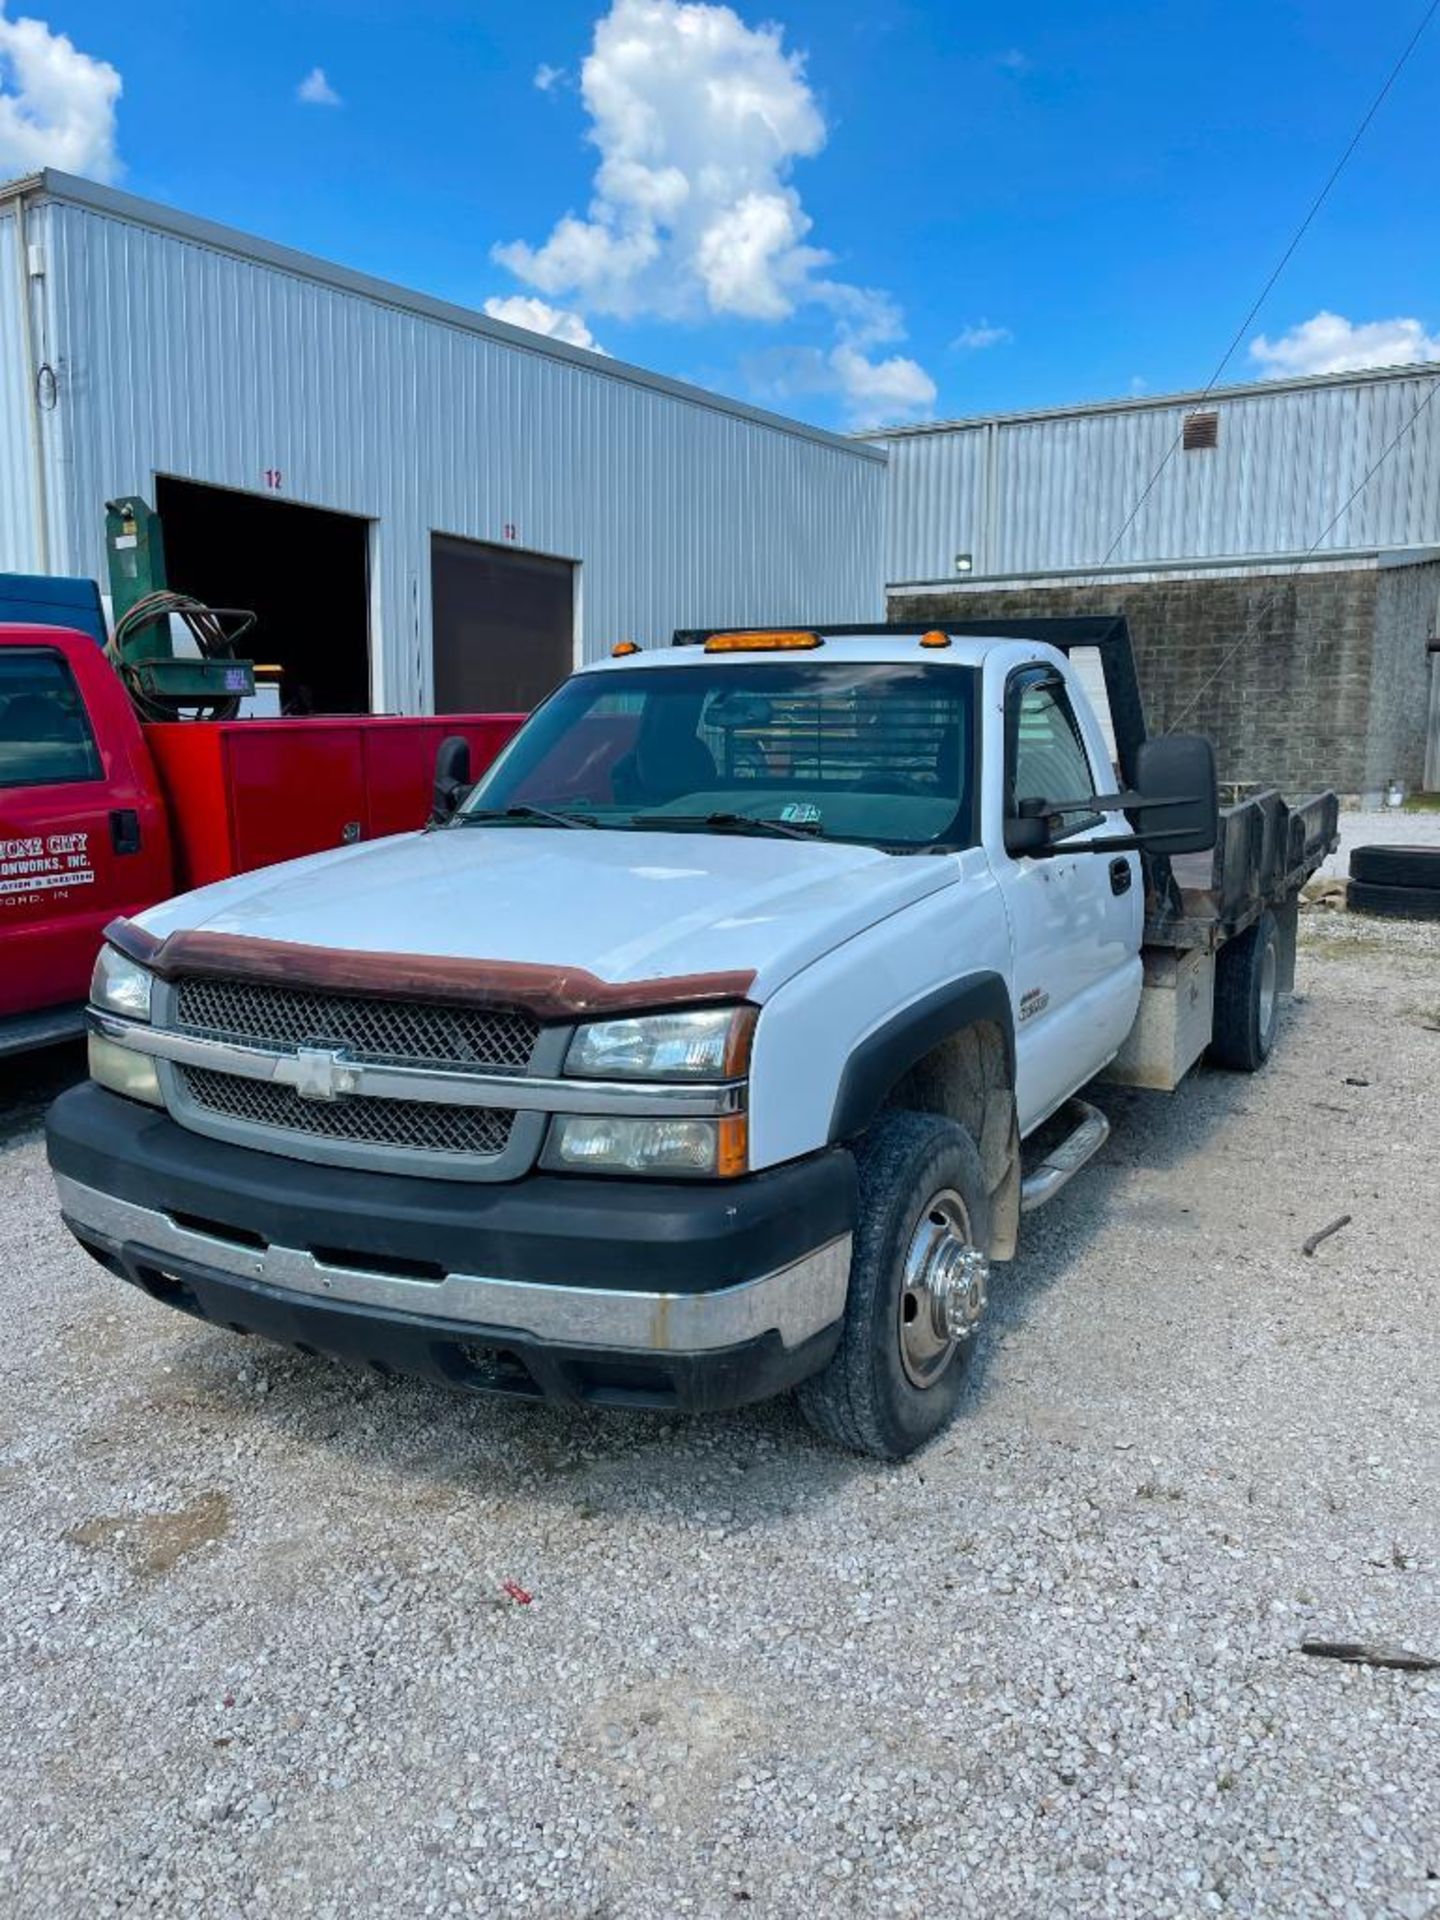 2003 CHEVY DURAMAX DUALLY FLATBED, DIESEL POWERED, AUTOMATIC TRANSMISSION, 12' FLATBED, SINGLE